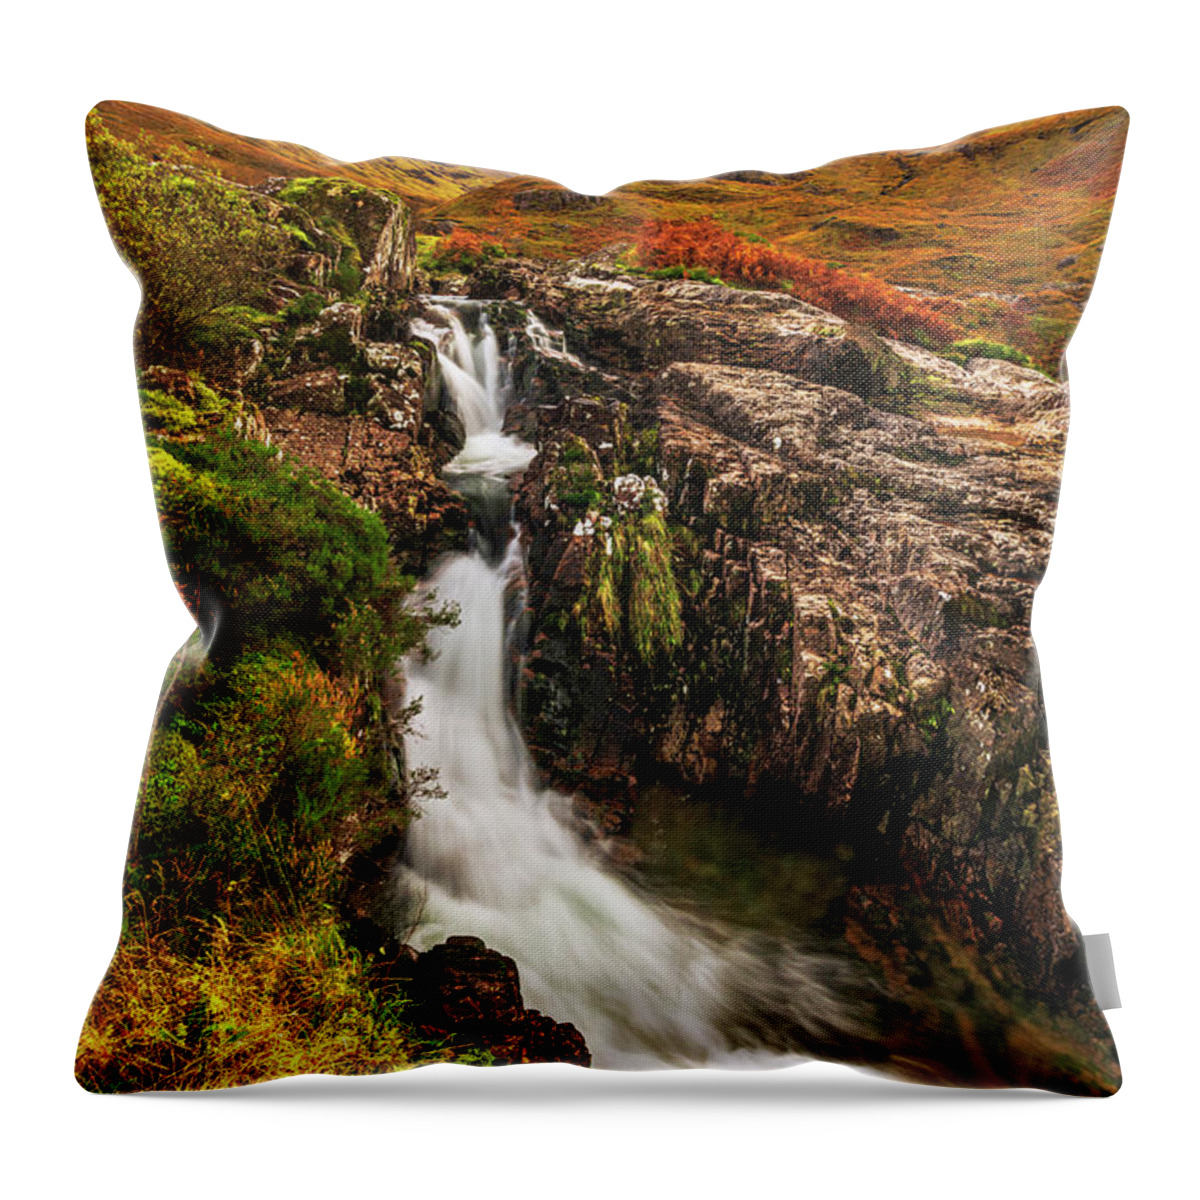 Autumn Throw Pillow featuring the photograph The Bend by Chad Dutson